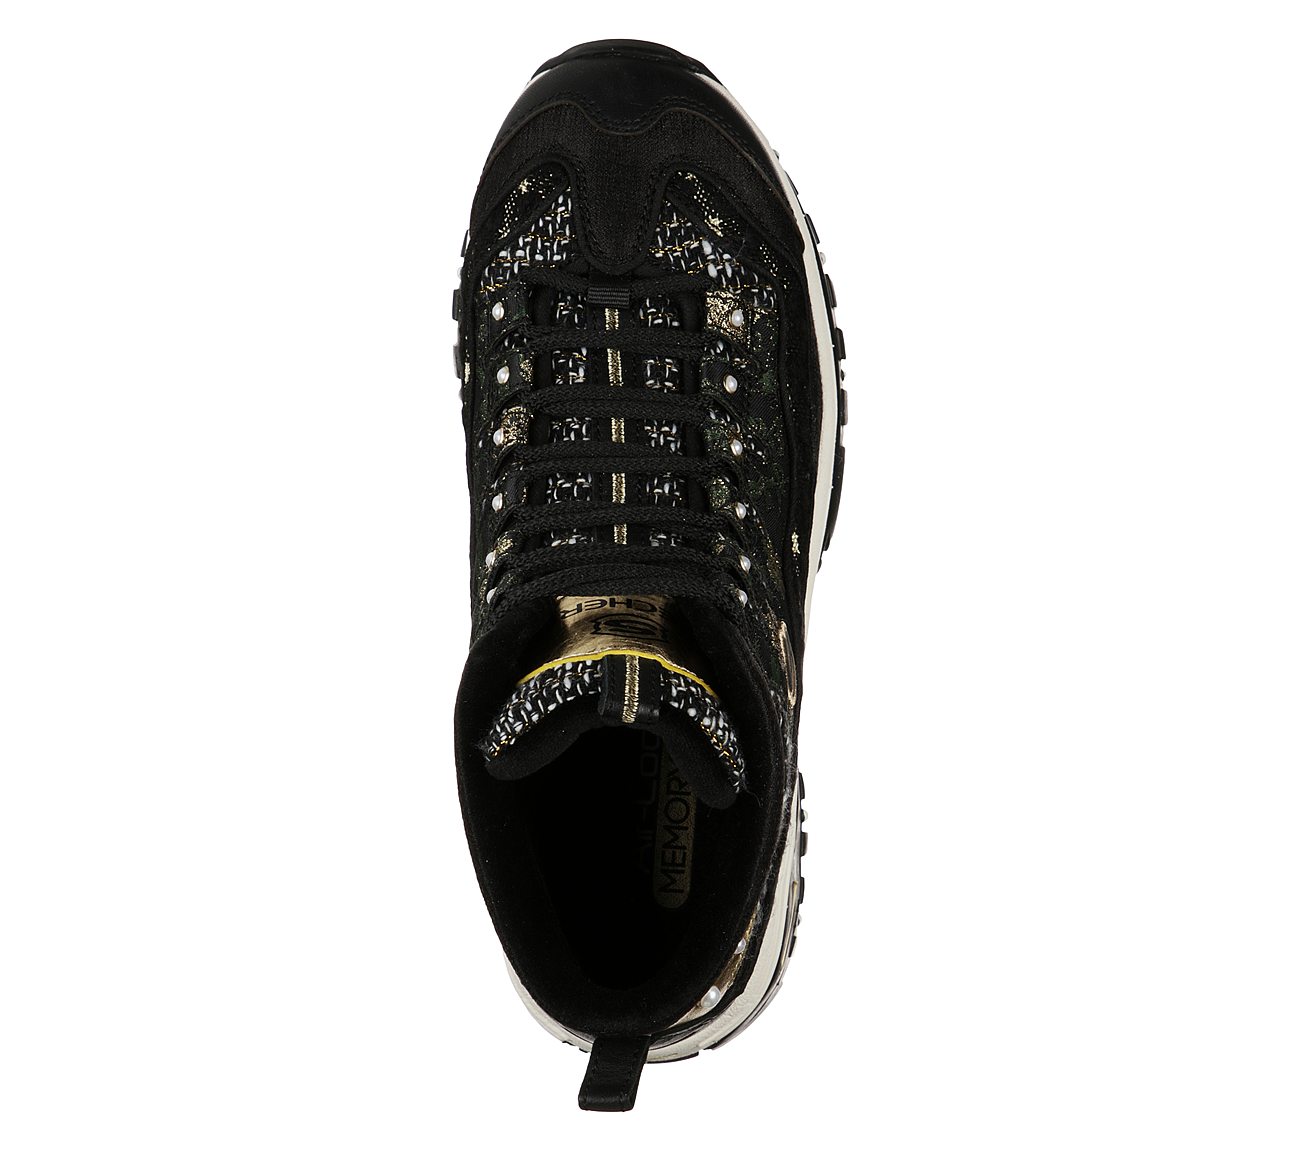 ENERGY-ECLECTIC TIMES, BLACK/GOLD Footwear Top View